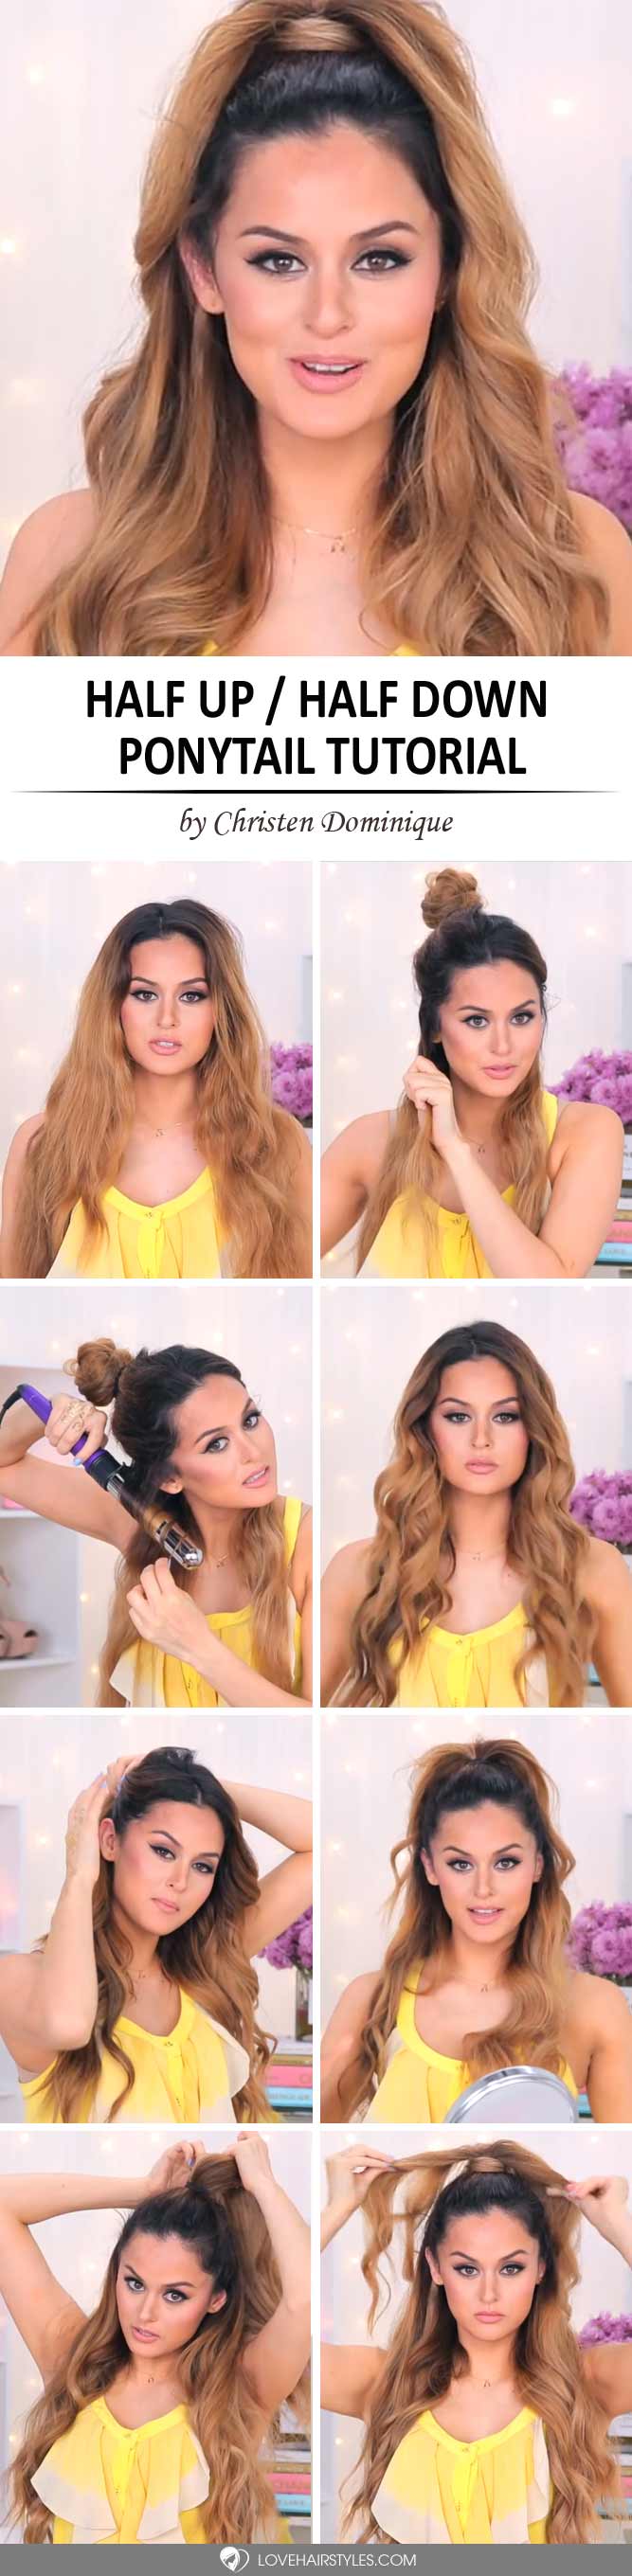 How to Do a Half Up Half Down Ponytail